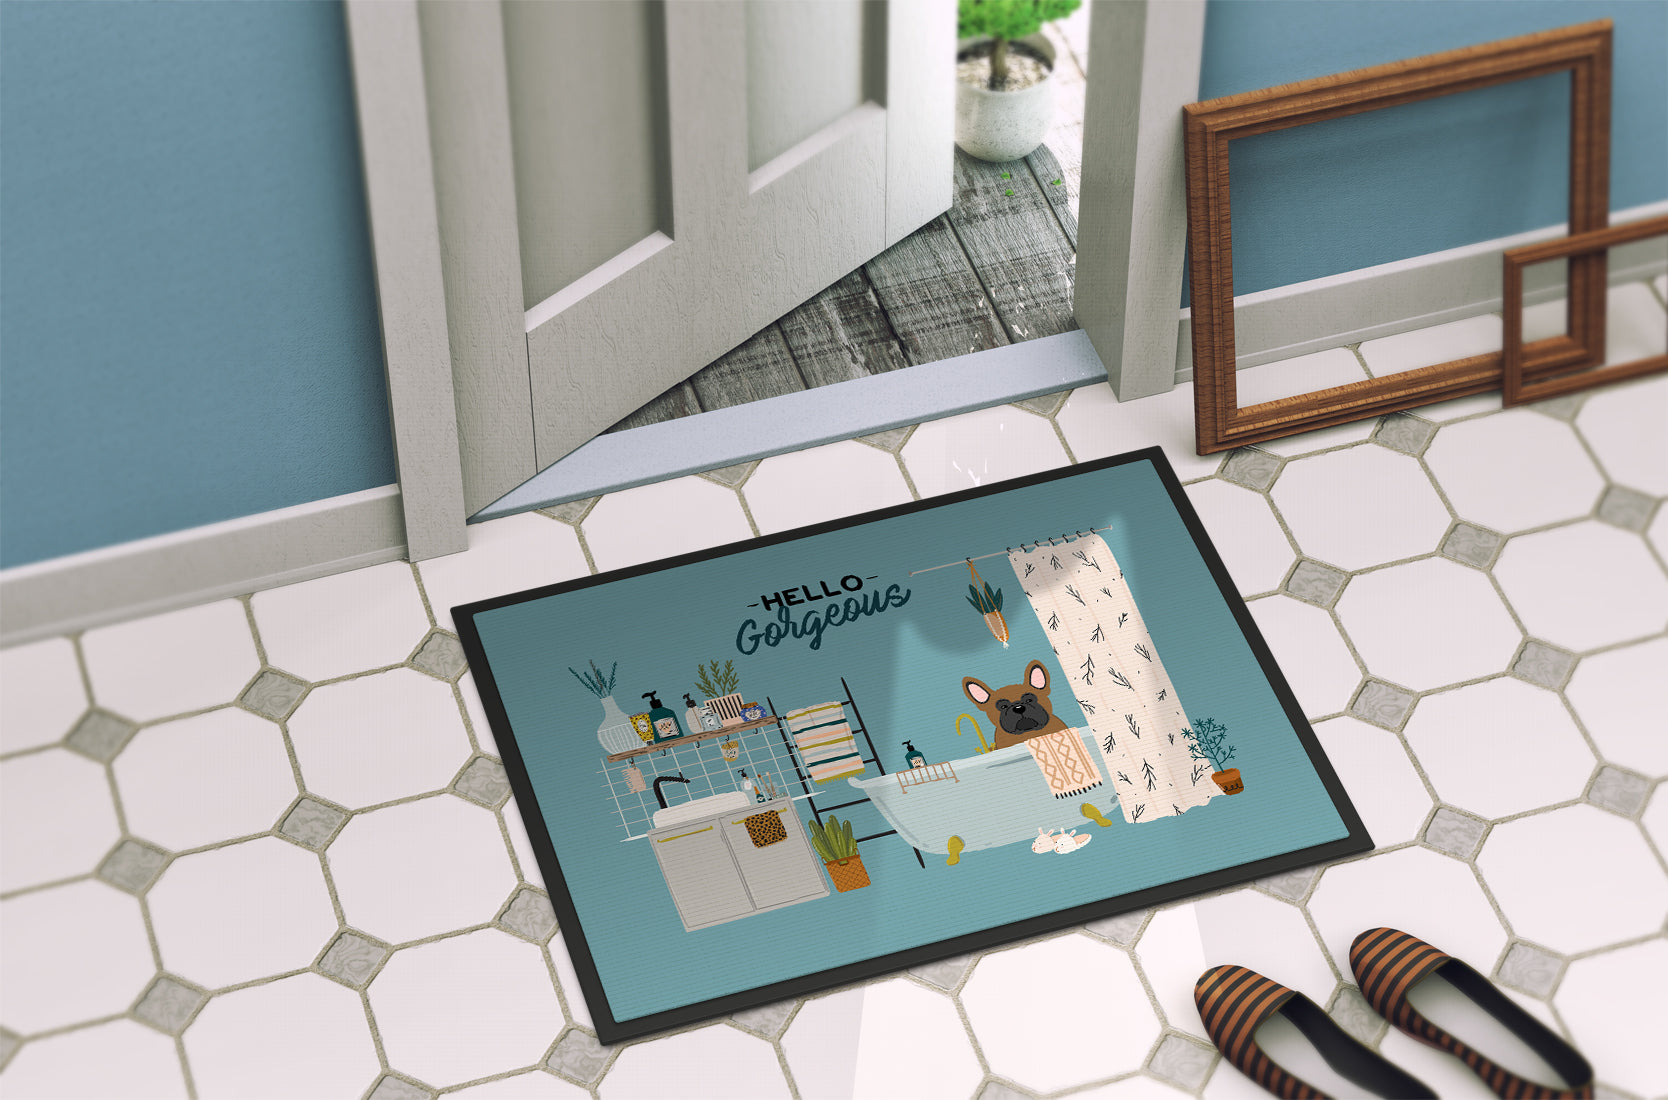 Brown French Bulldog in Bathtub Indoor or Outdoor Mat 18x27 CK7435MAT - the-store.com